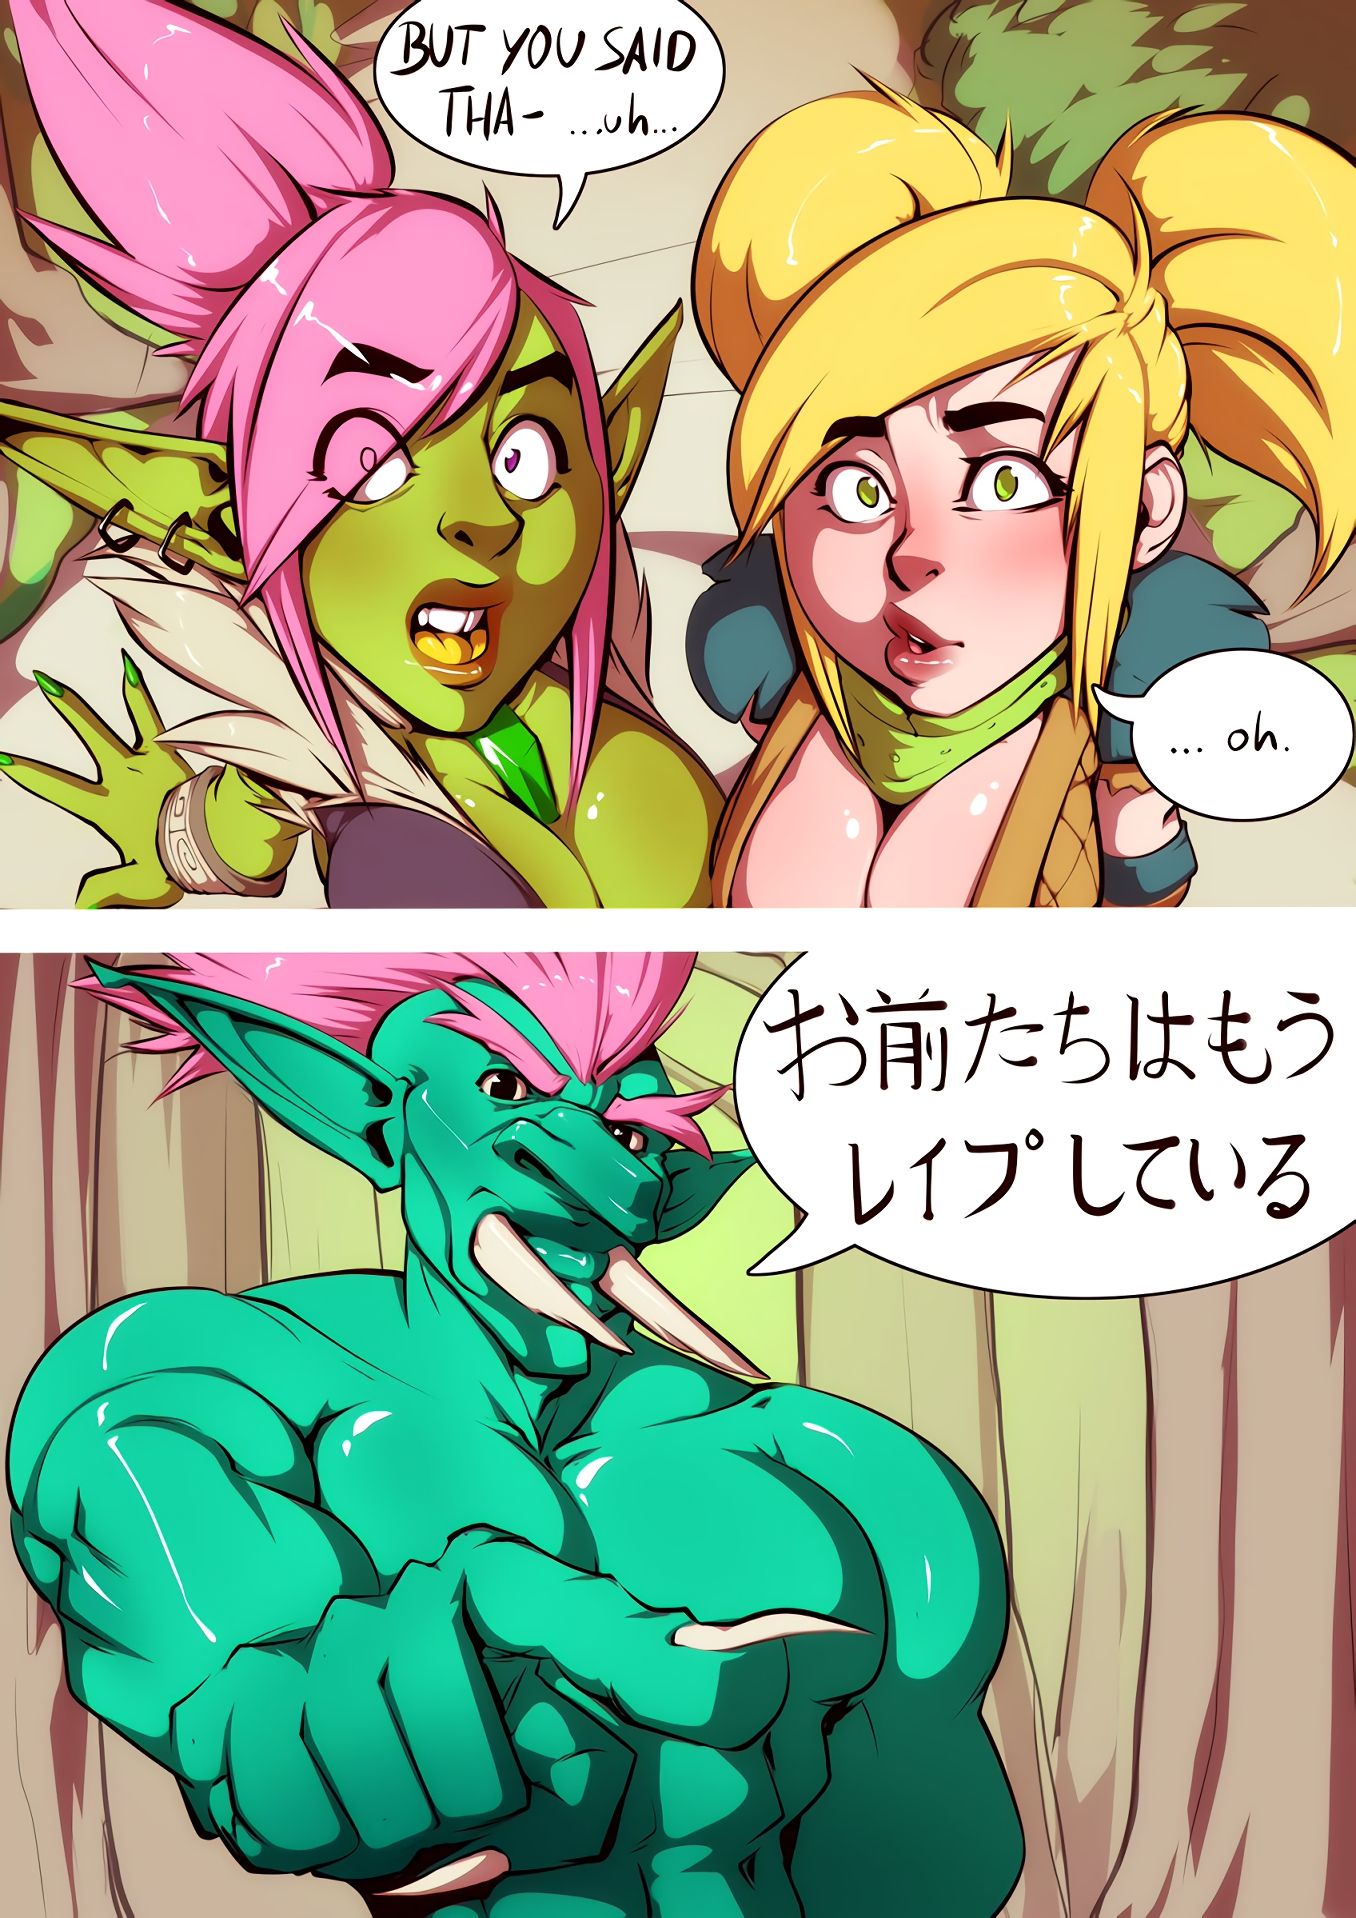 Goblins and Gnomes - Svenners | MyComicsxxx